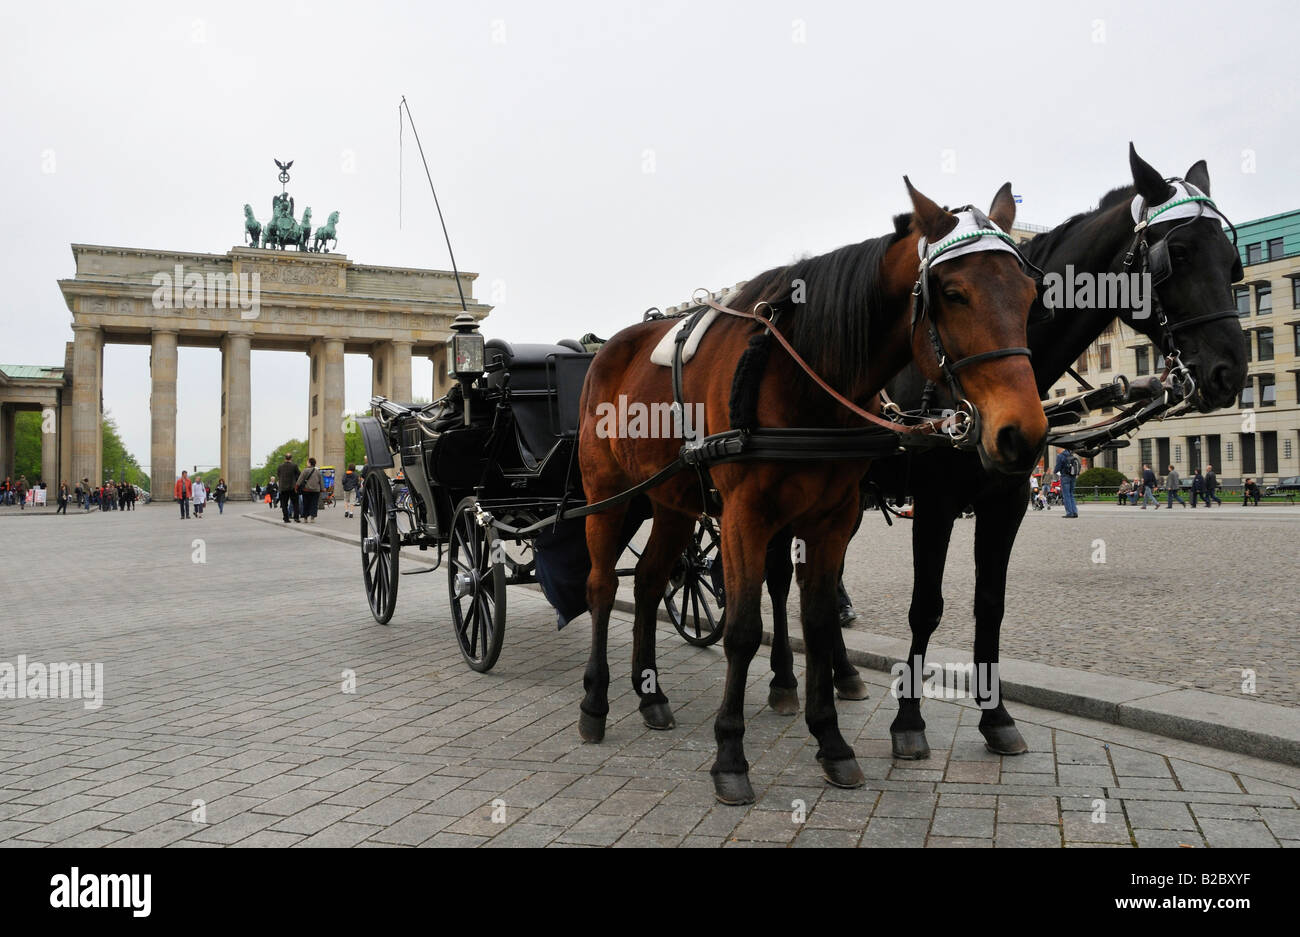 Horse-drawn carriage in front of the Brandenburger Tor, Pariser Platz Square, Berlin, Germany, Europe Stock Photo